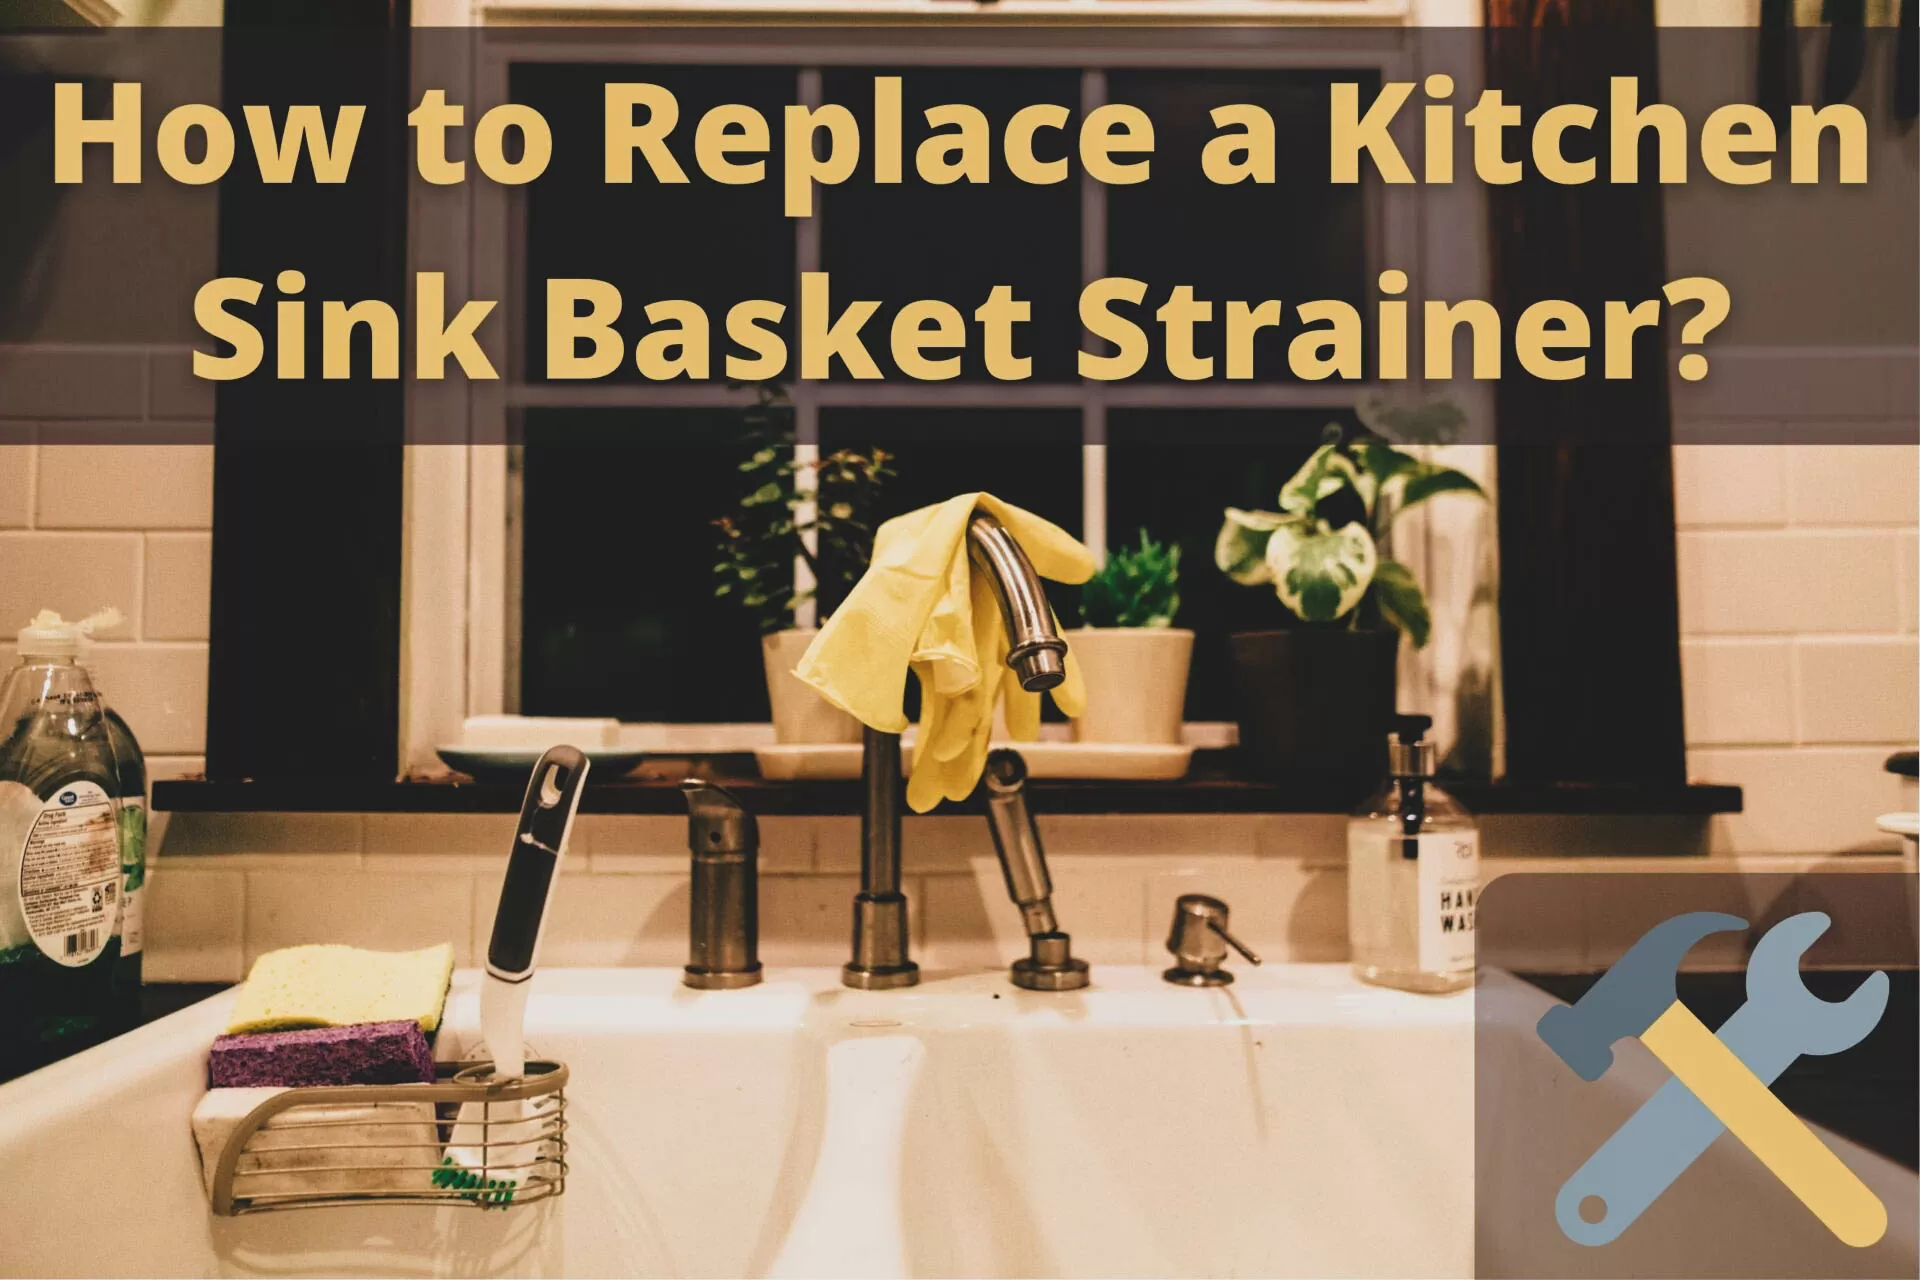 ow to replace kitchen sink basket strainer